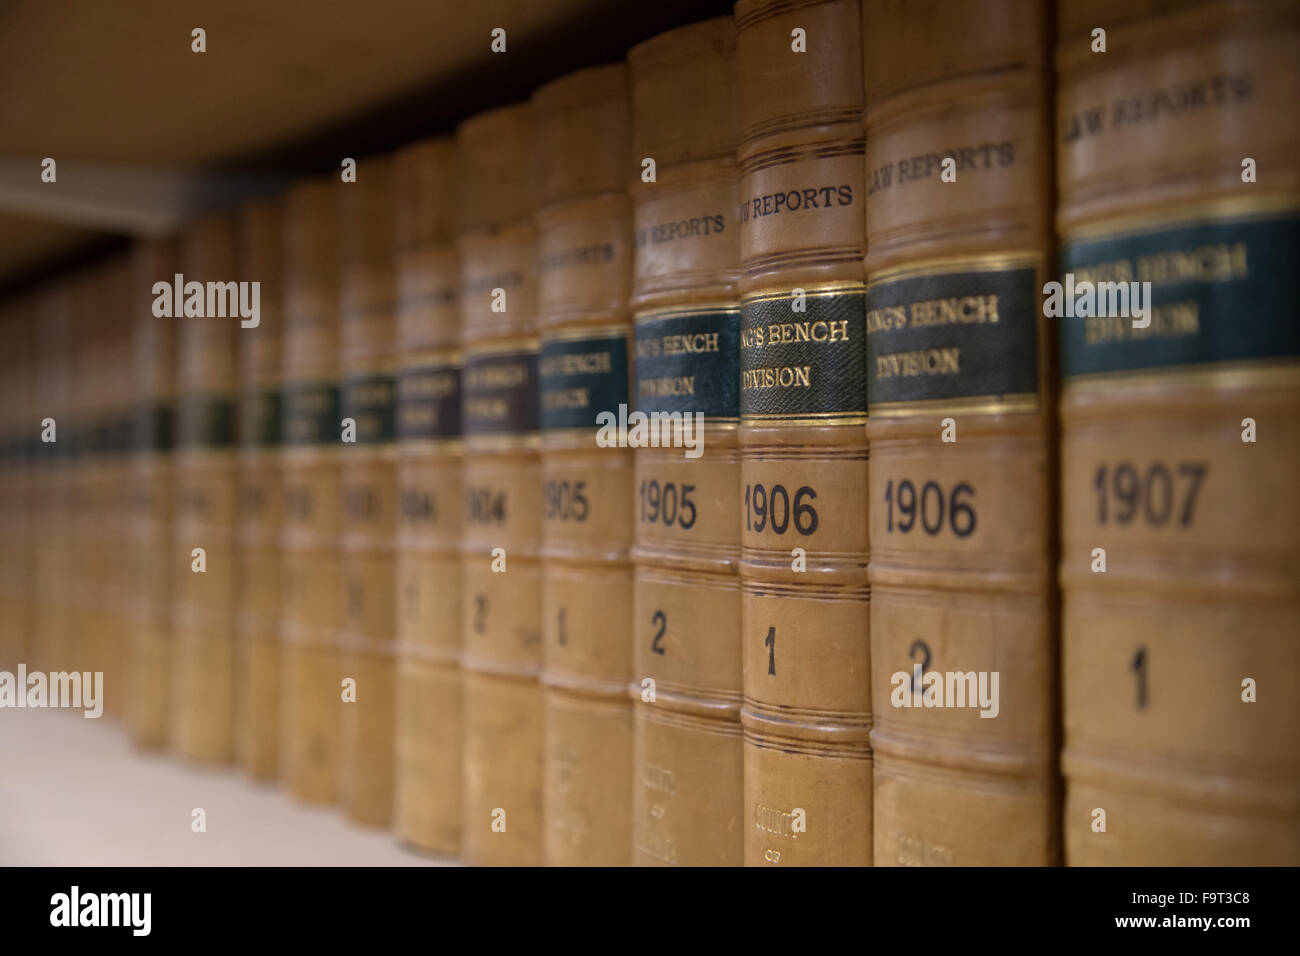 Legal text books and files stored on shelves in a record office Stock Photo